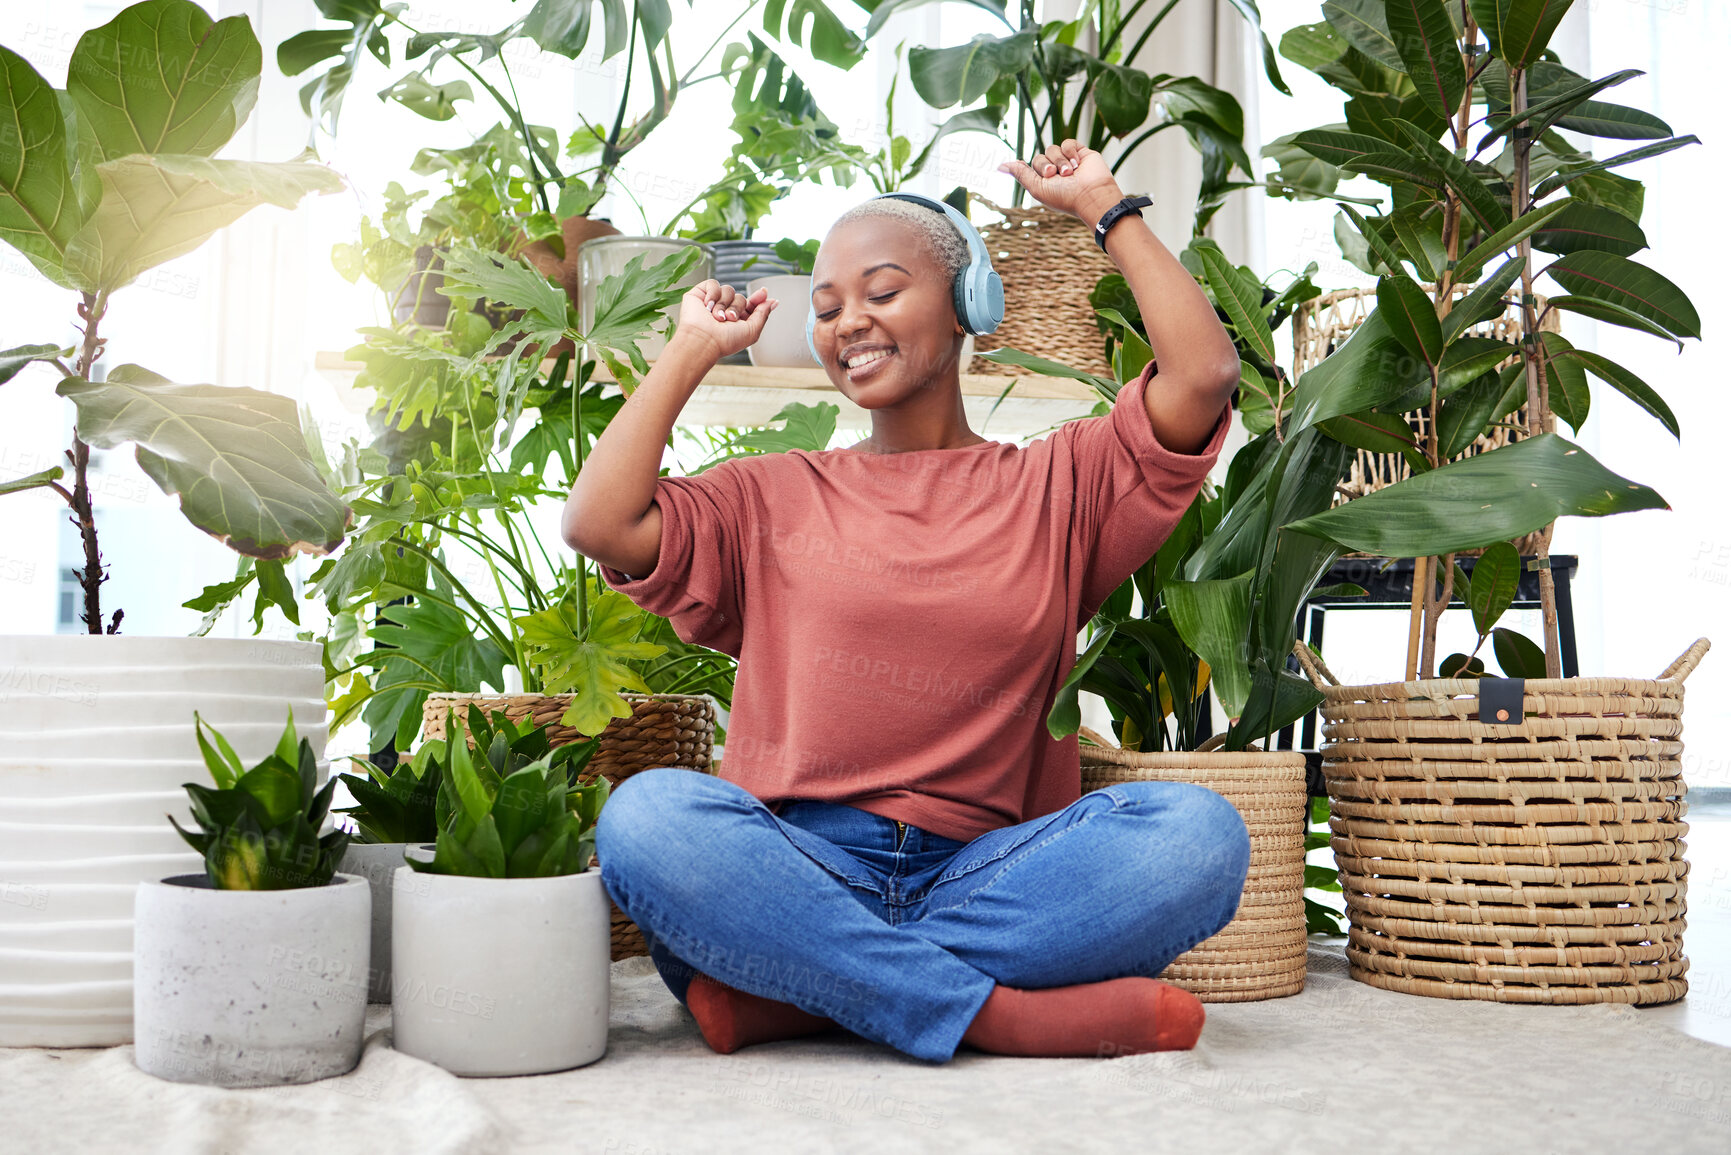 Buy stock photo Music, dance and radio with a black woman in her home by plants while streaming an audio playlist. Freedom, headphones and subscription service with a carefree young female person in her house